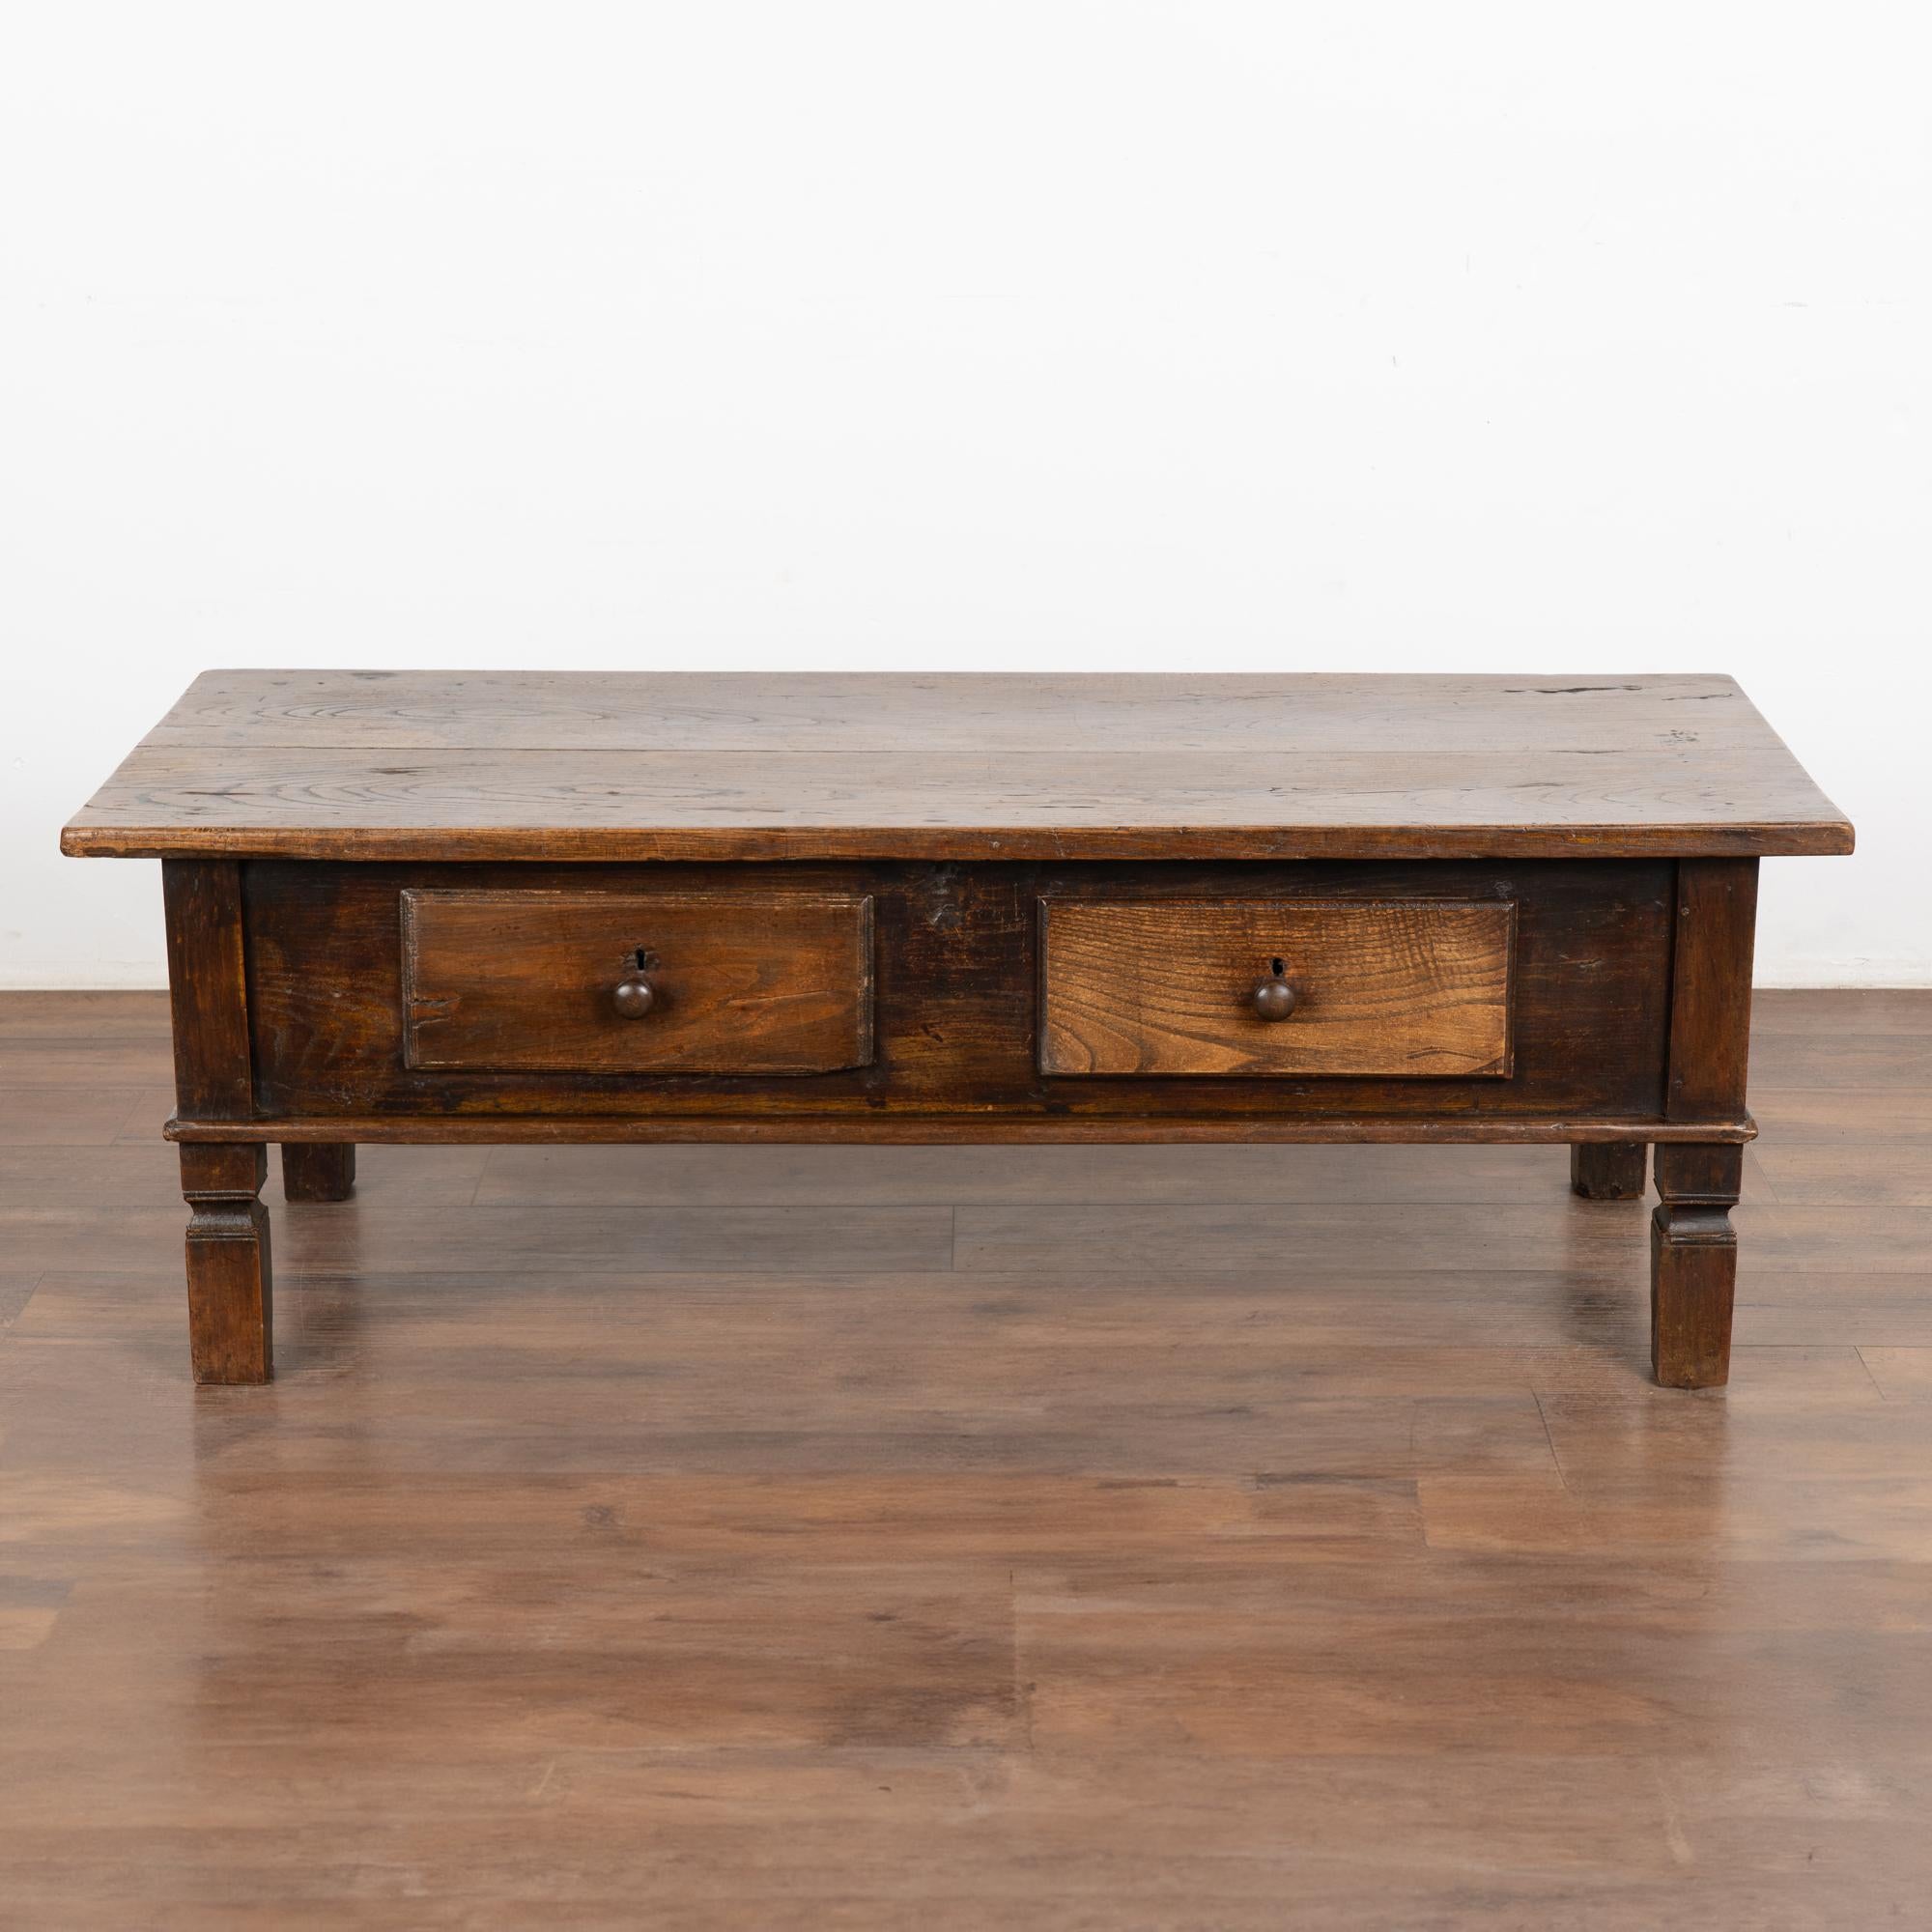 19th Century Two Drawer French Country Oak Coffee Table, circa 1820-40 For Sale